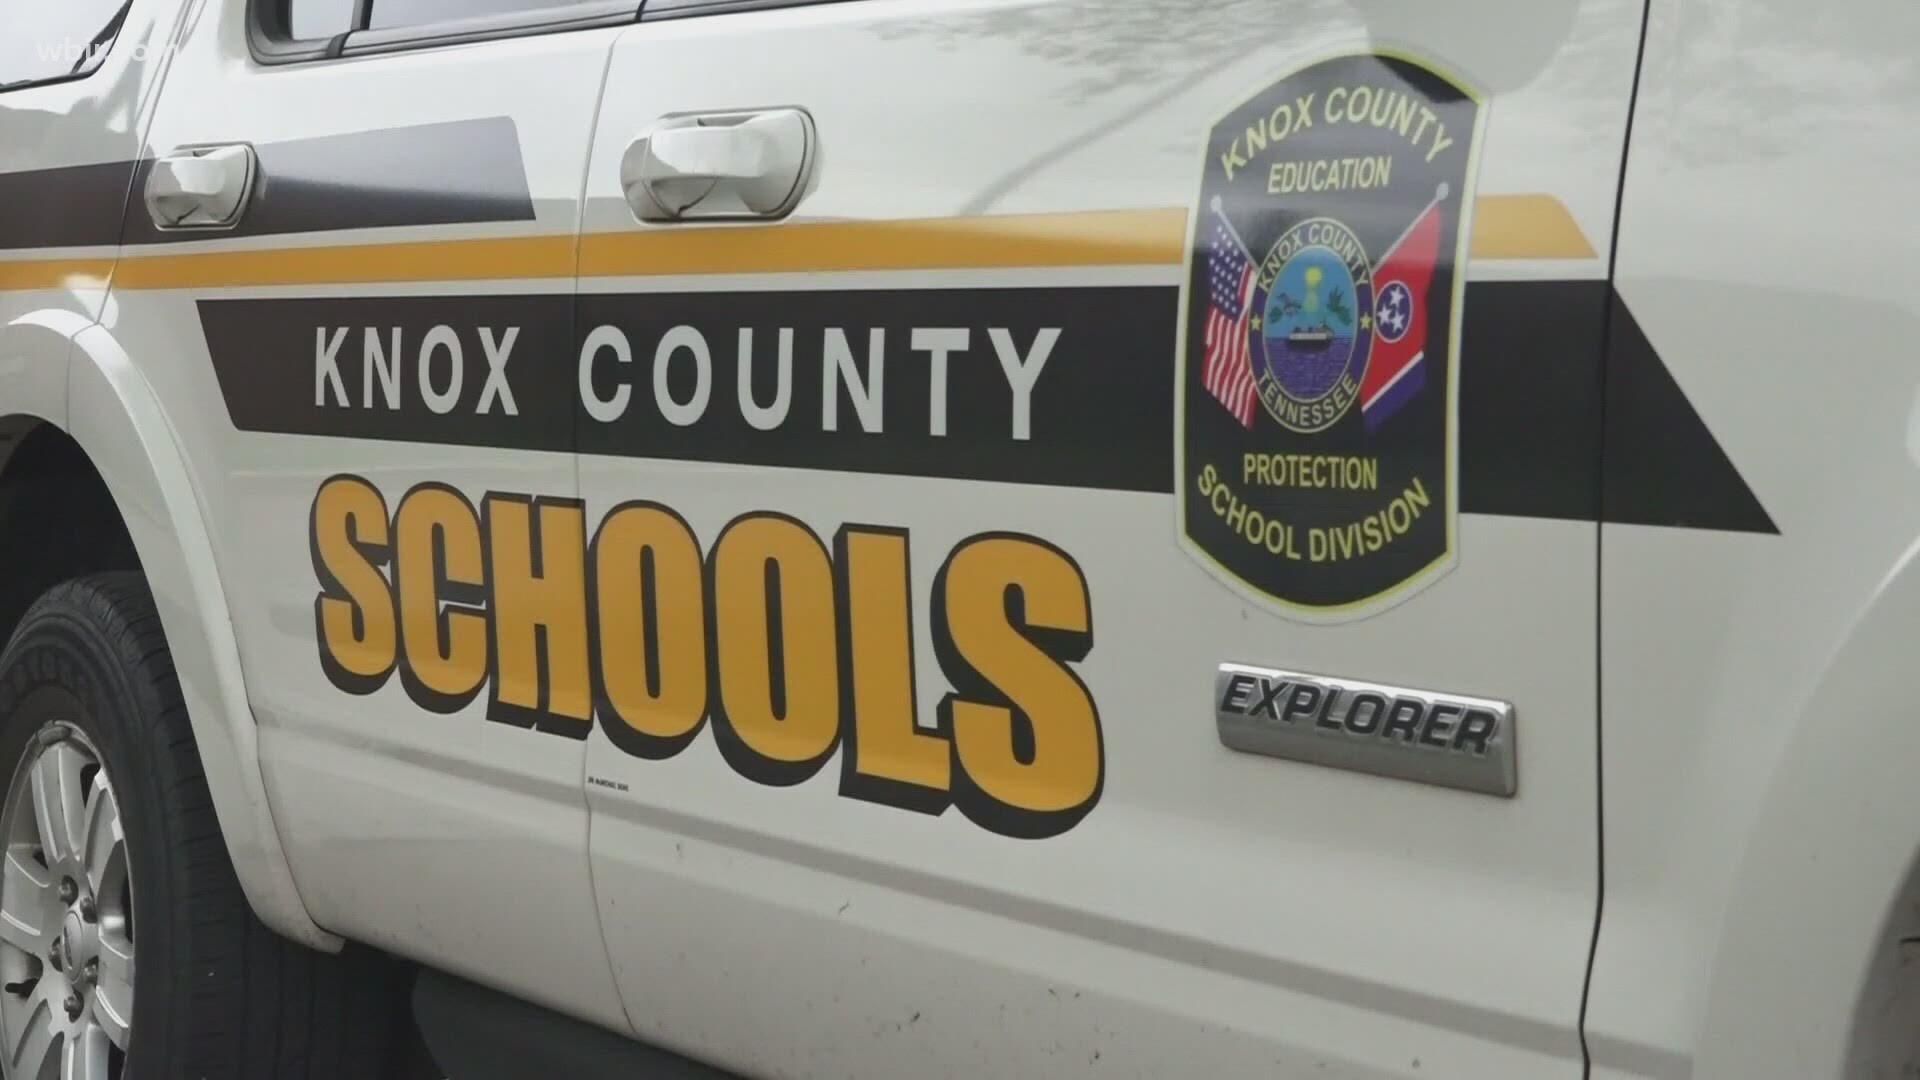 Now that the school system has approved a new security agreement with KPD, we take a look at what it means.